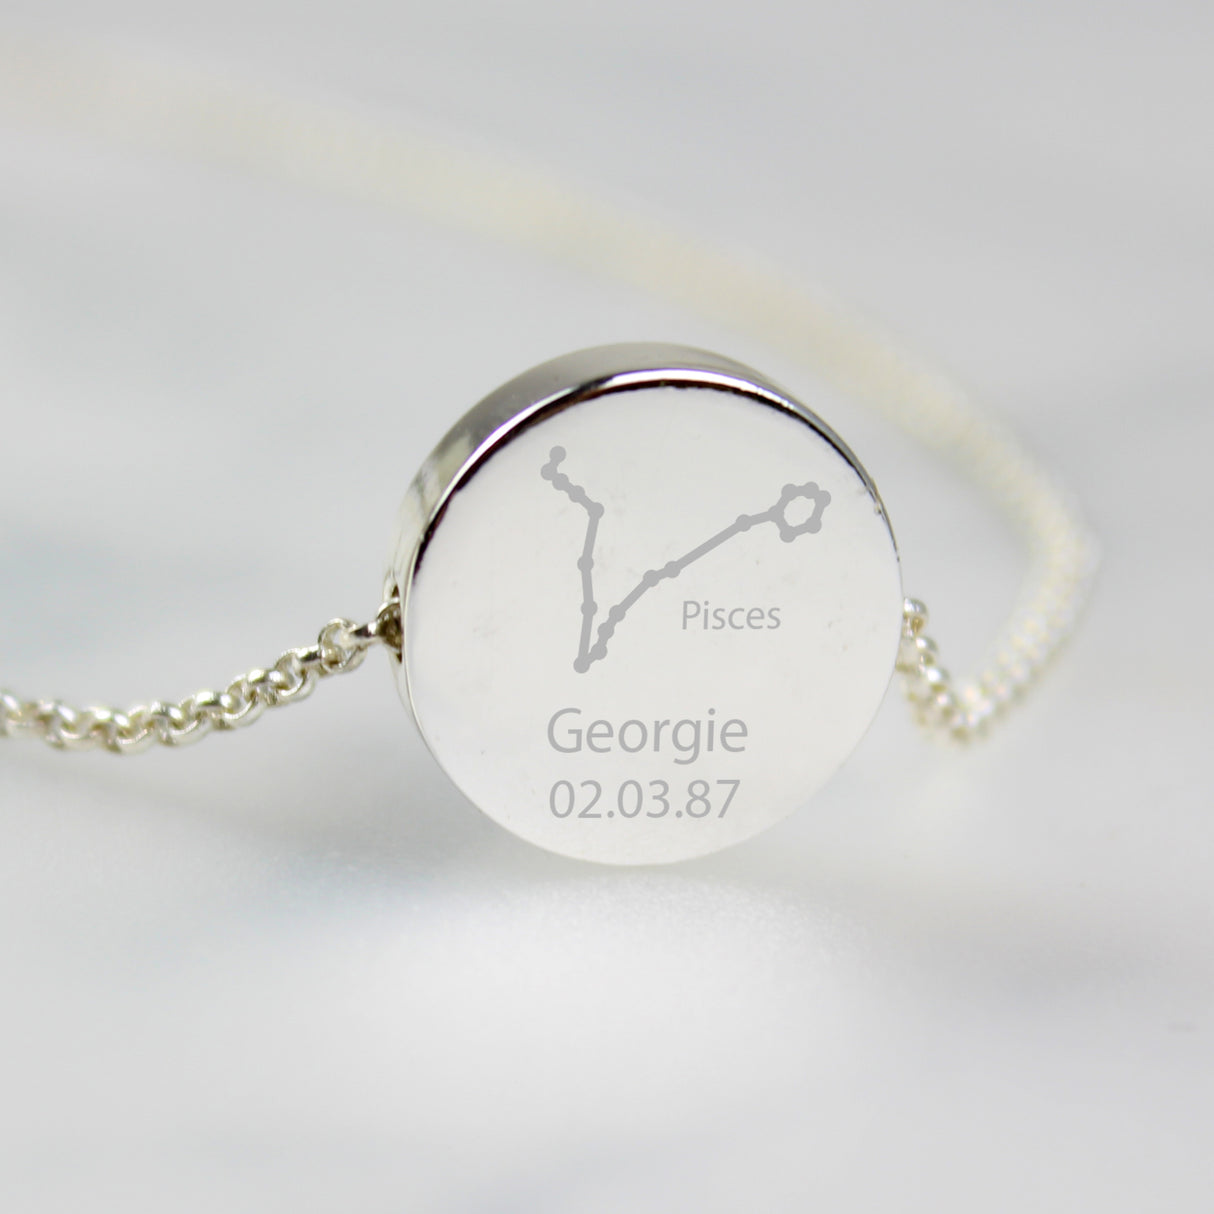 Personalised Pisces Zodiac Star Sign Necklace (Feb 19th - Mar 20th)